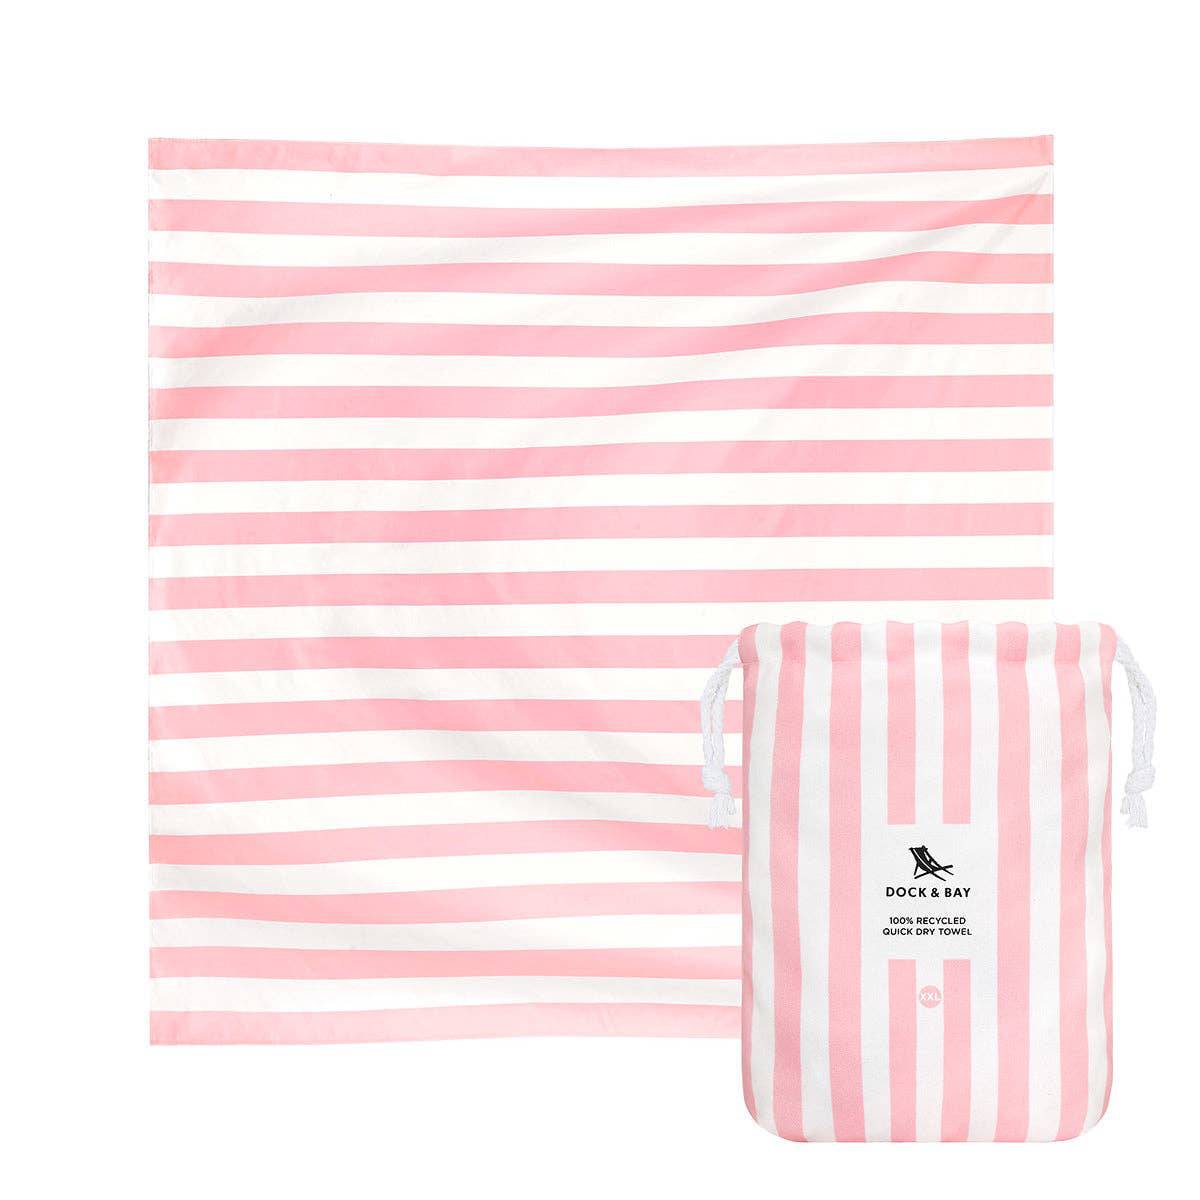 Dock & Bay Quick Dry Towel for Two - Double Extra Large - Malibu Pink - The Preppy Bunny